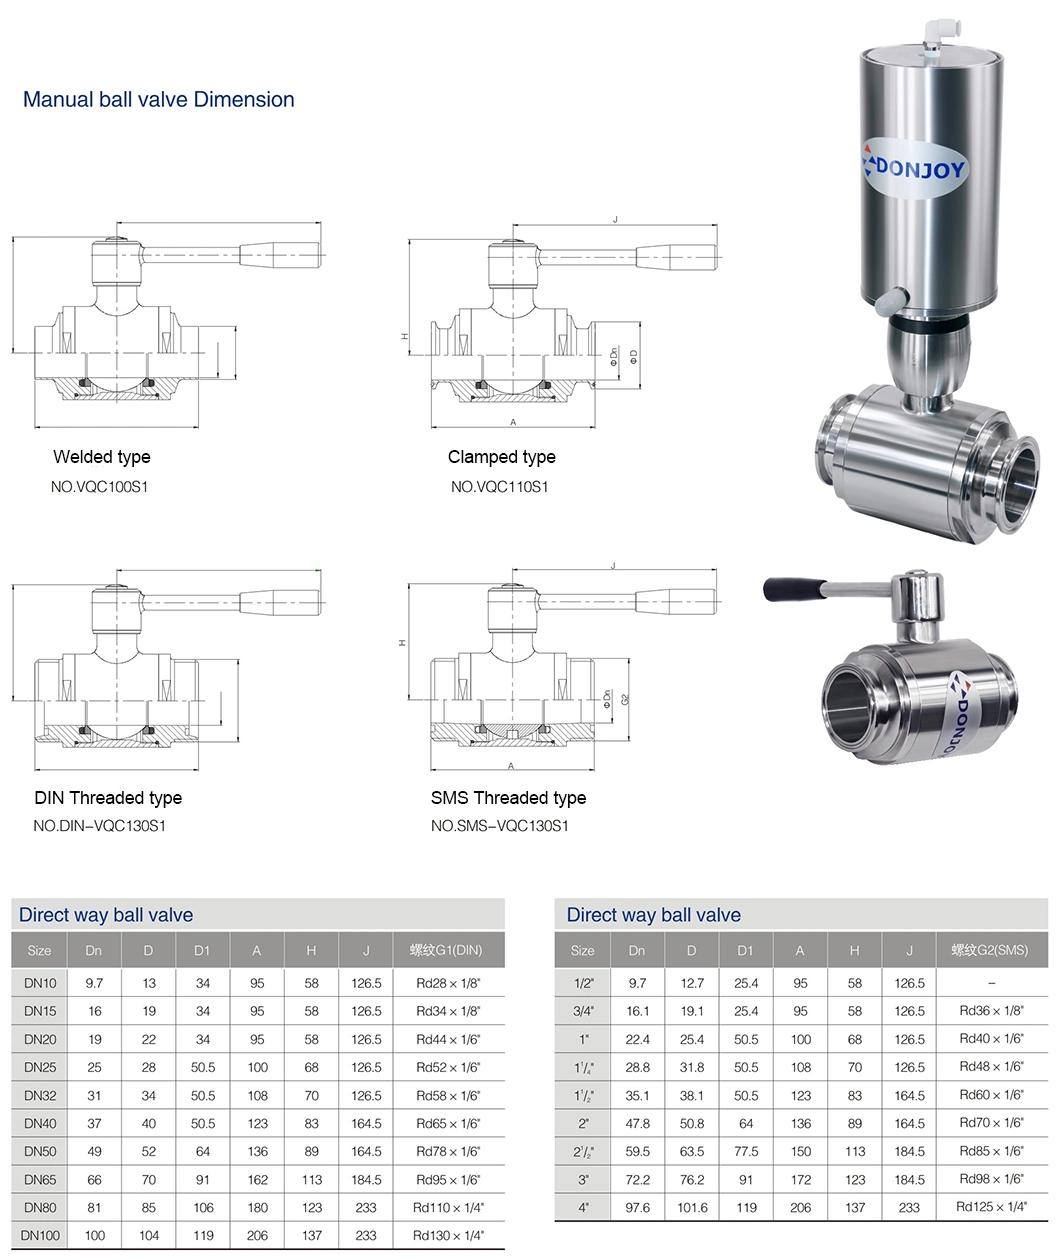 Us 3A Donjoy Sanitary Ball Valve with Bottom Connection